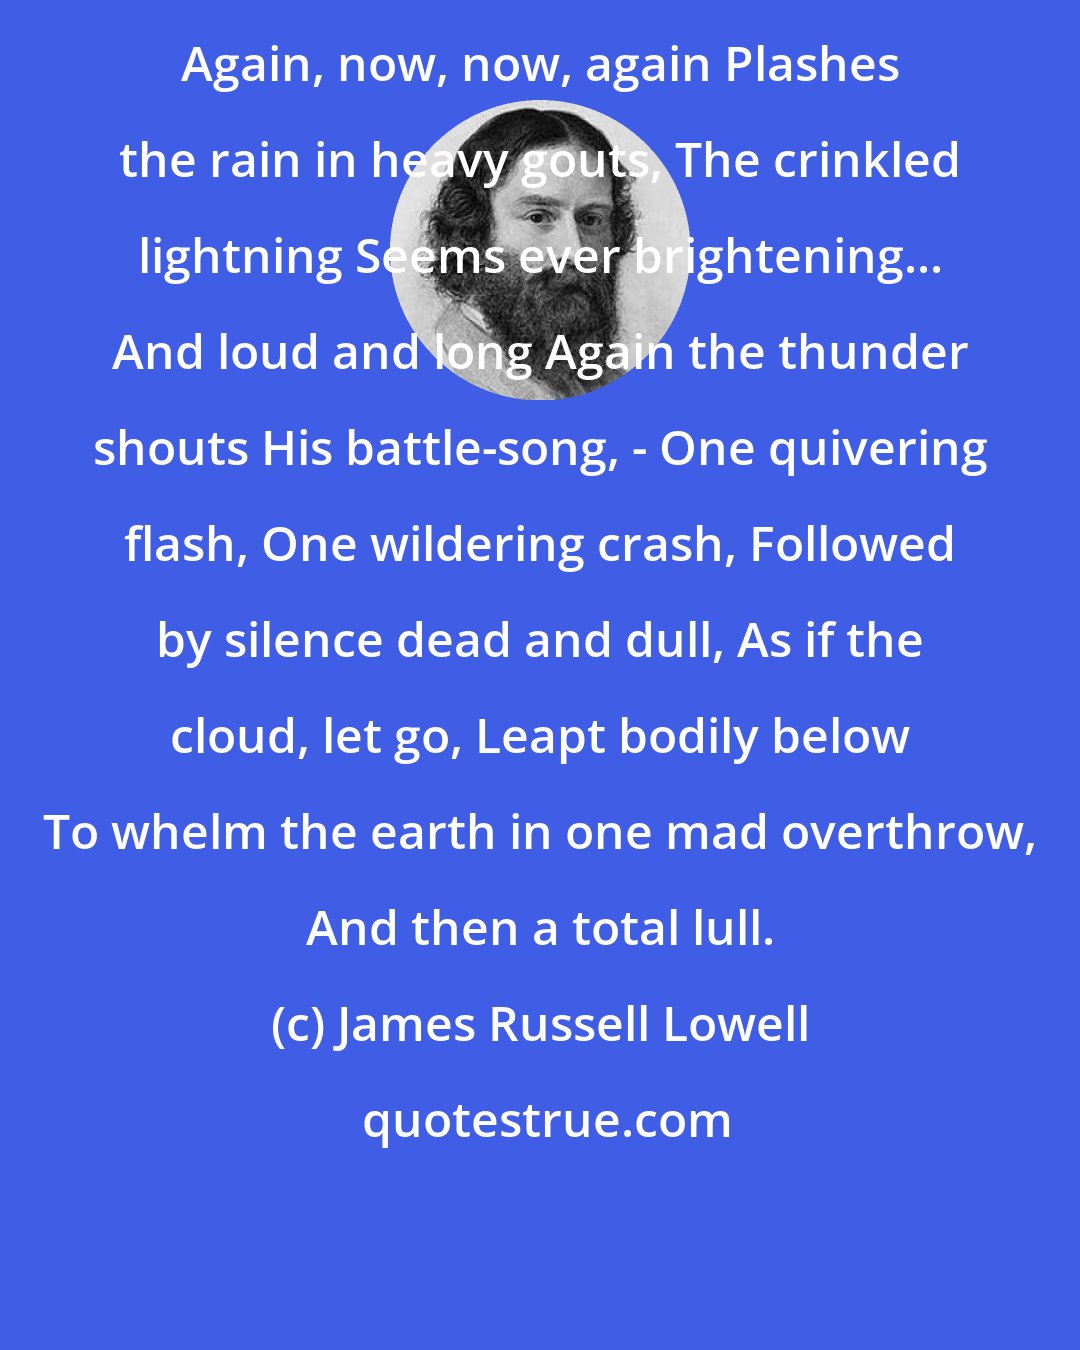 James Russell Lowell: Again, now, now, again Plashes the rain in heavy gouts, The crinkled lightning Seems ever brightening... And loud and long Again the thunder shouts His battle-song, - One quivering flash, One wildering crash, Followed by silence dead and dull, As if the cloud, let go, Leapt bodily below To whelm the earth in one mad overthrow, And then a total lull.